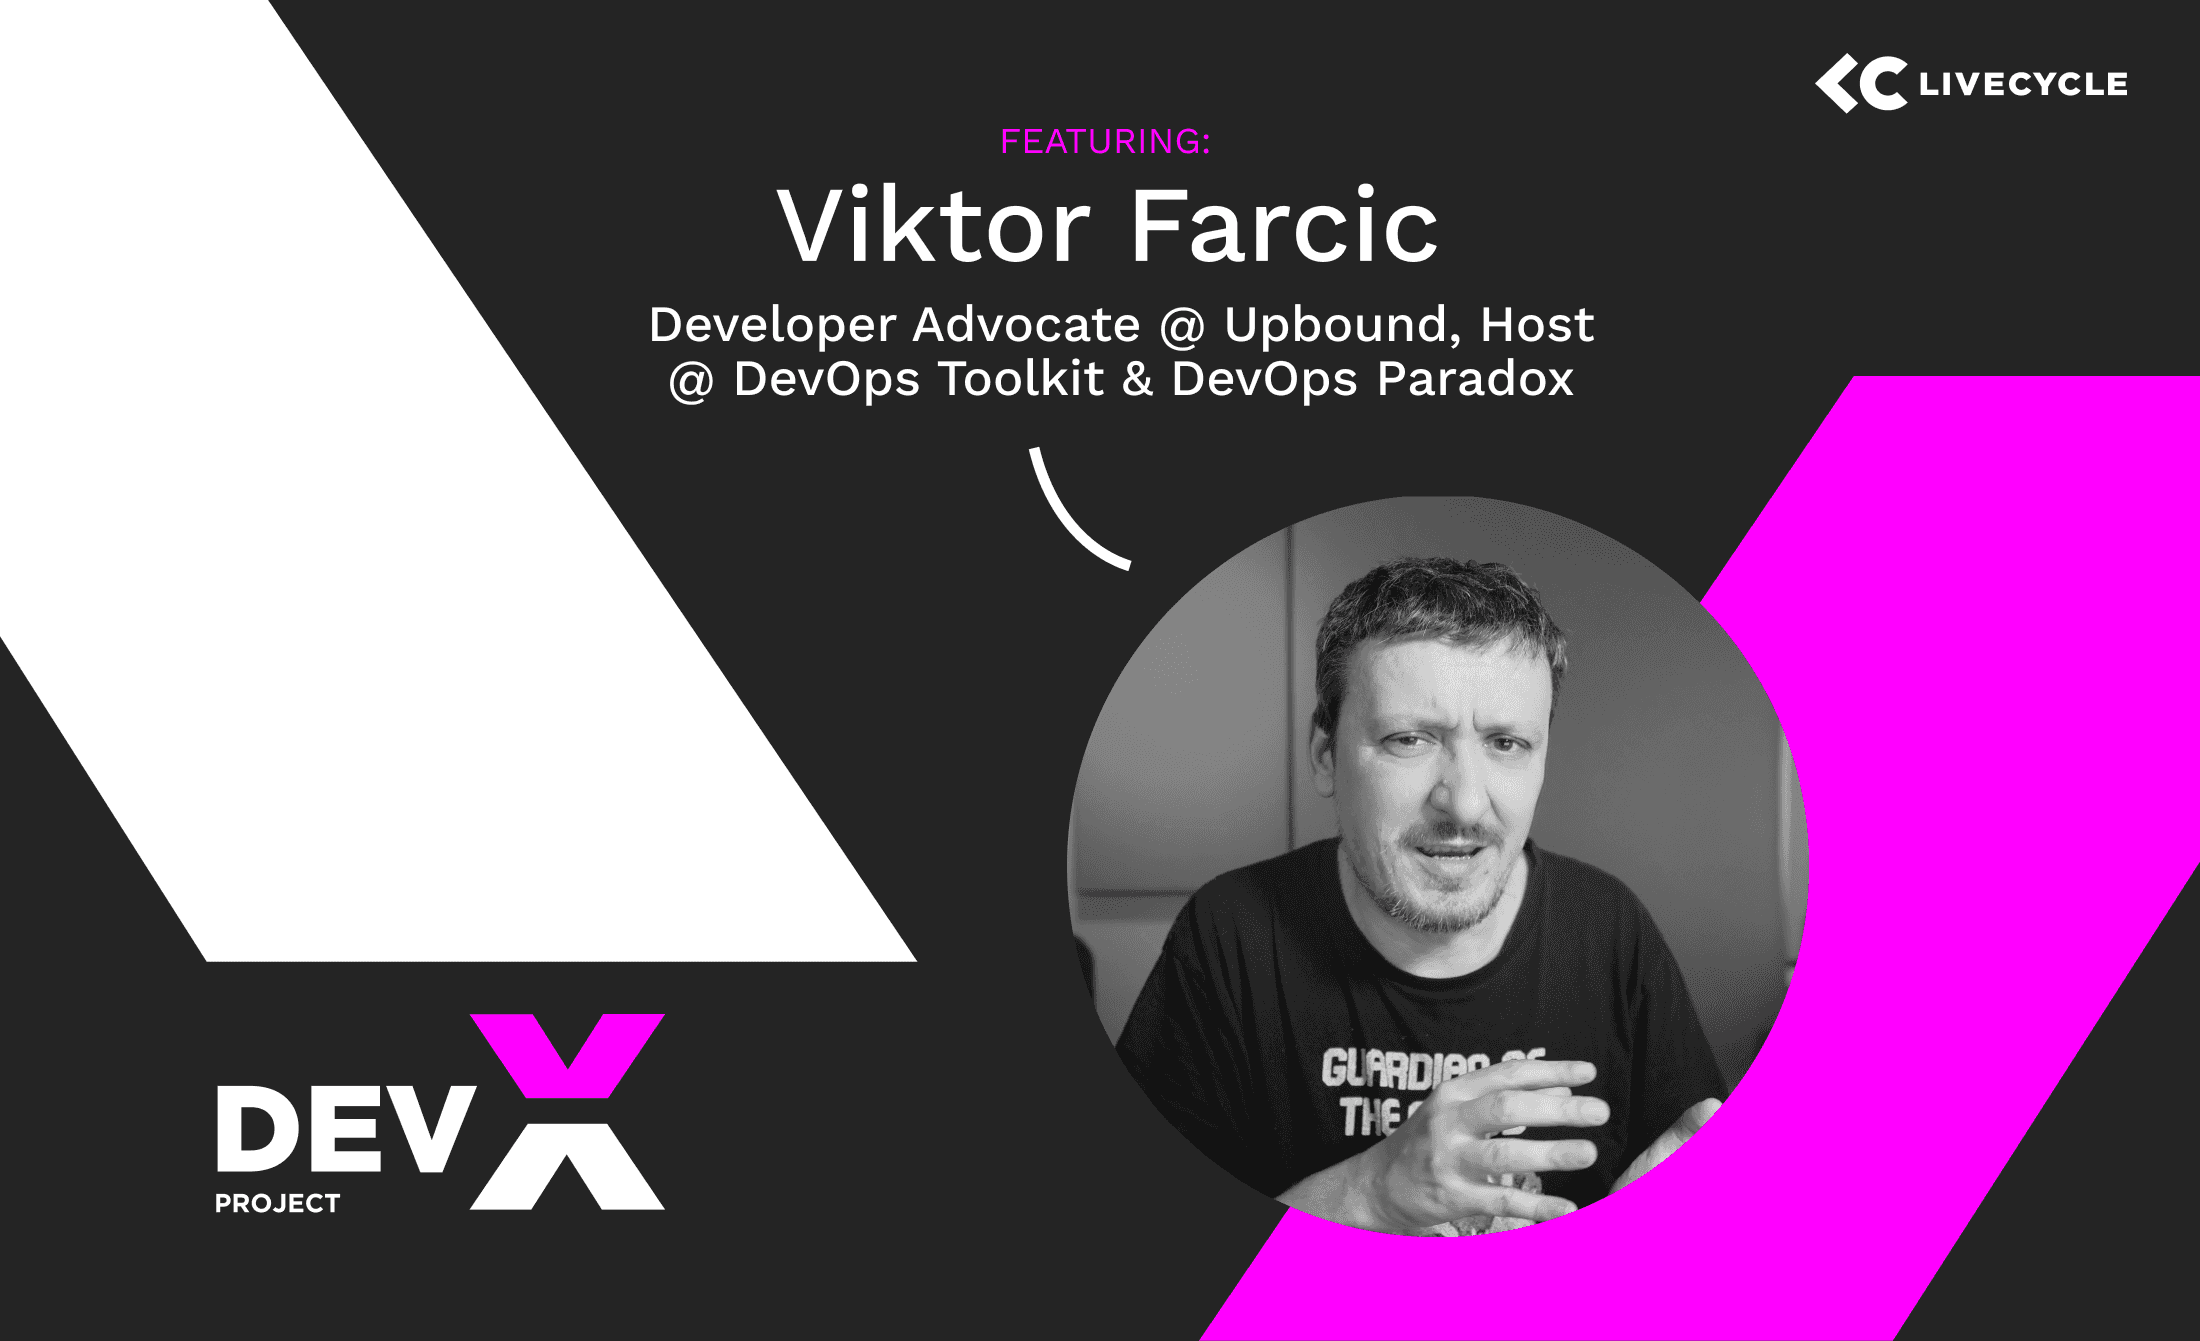 The Dev-X Project: Featuring Viktor Farcic